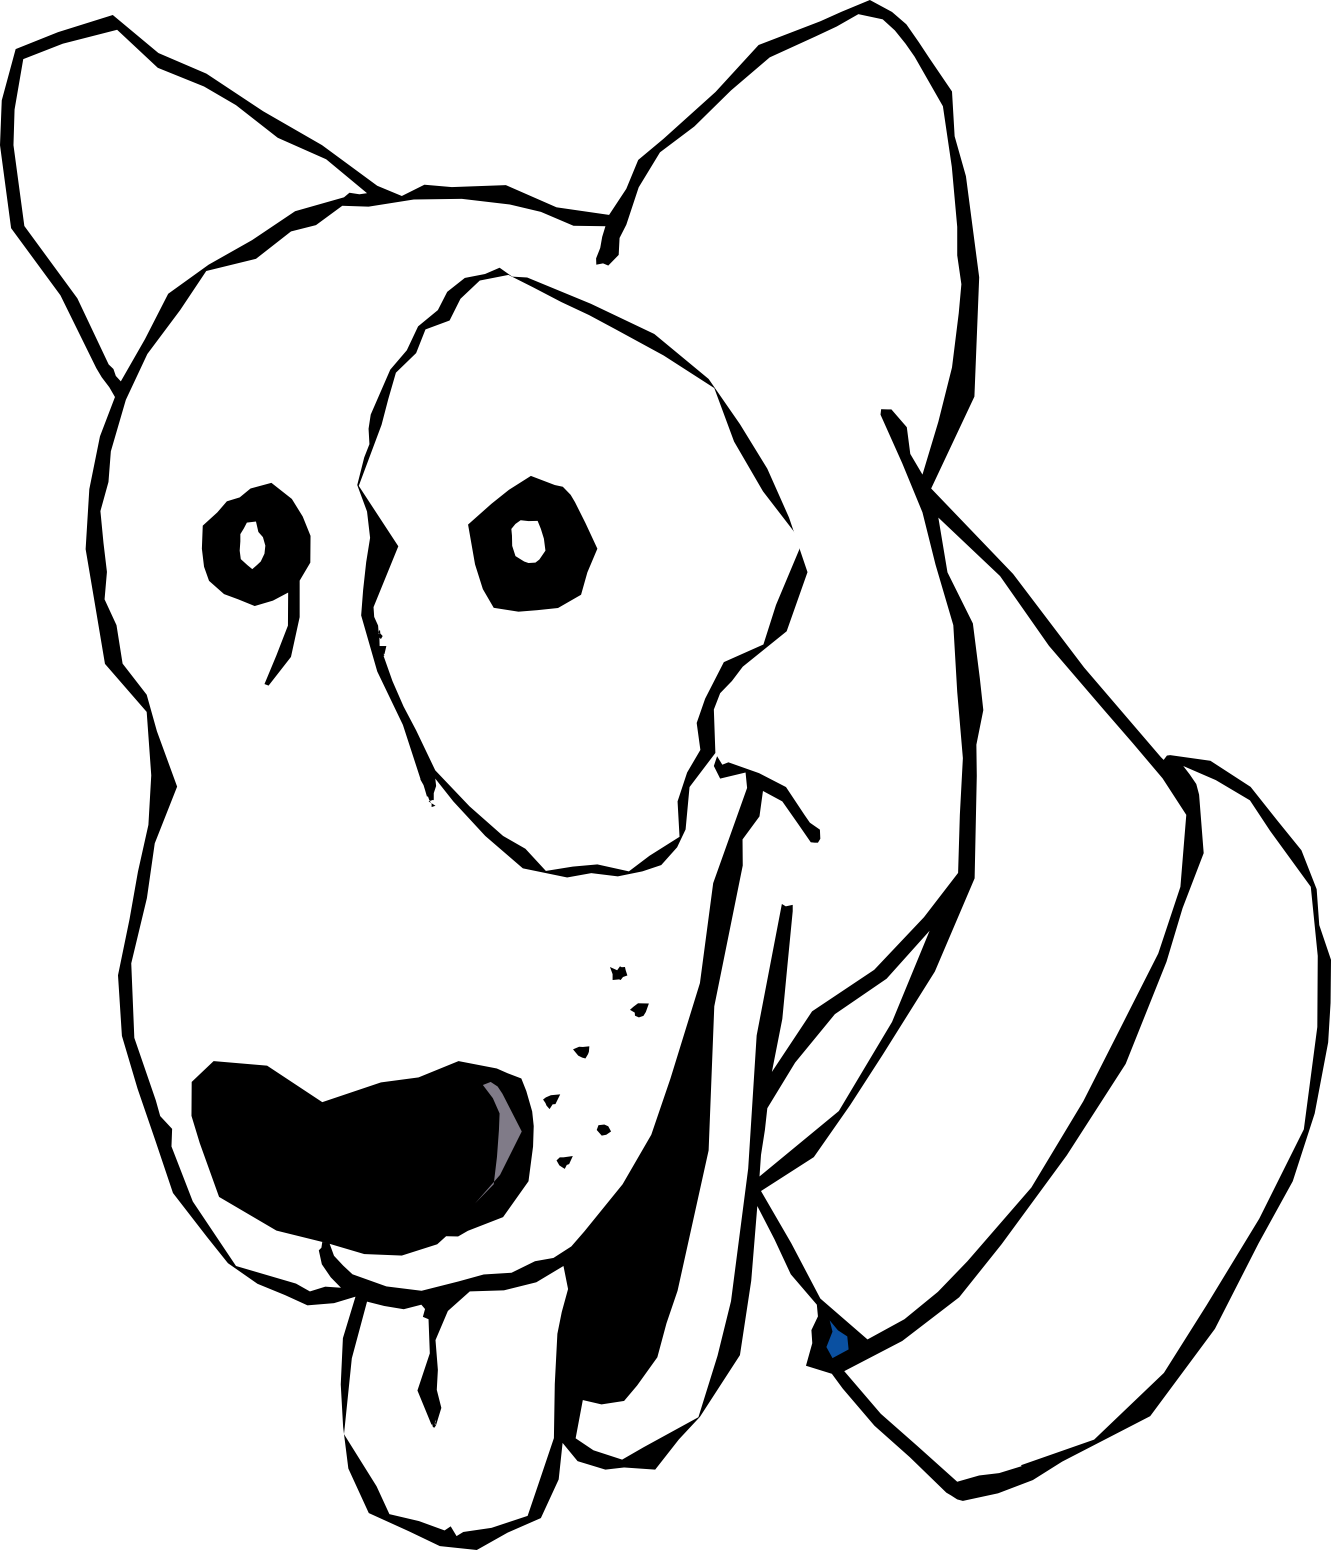 free black and white clipart of dogs - photo #46